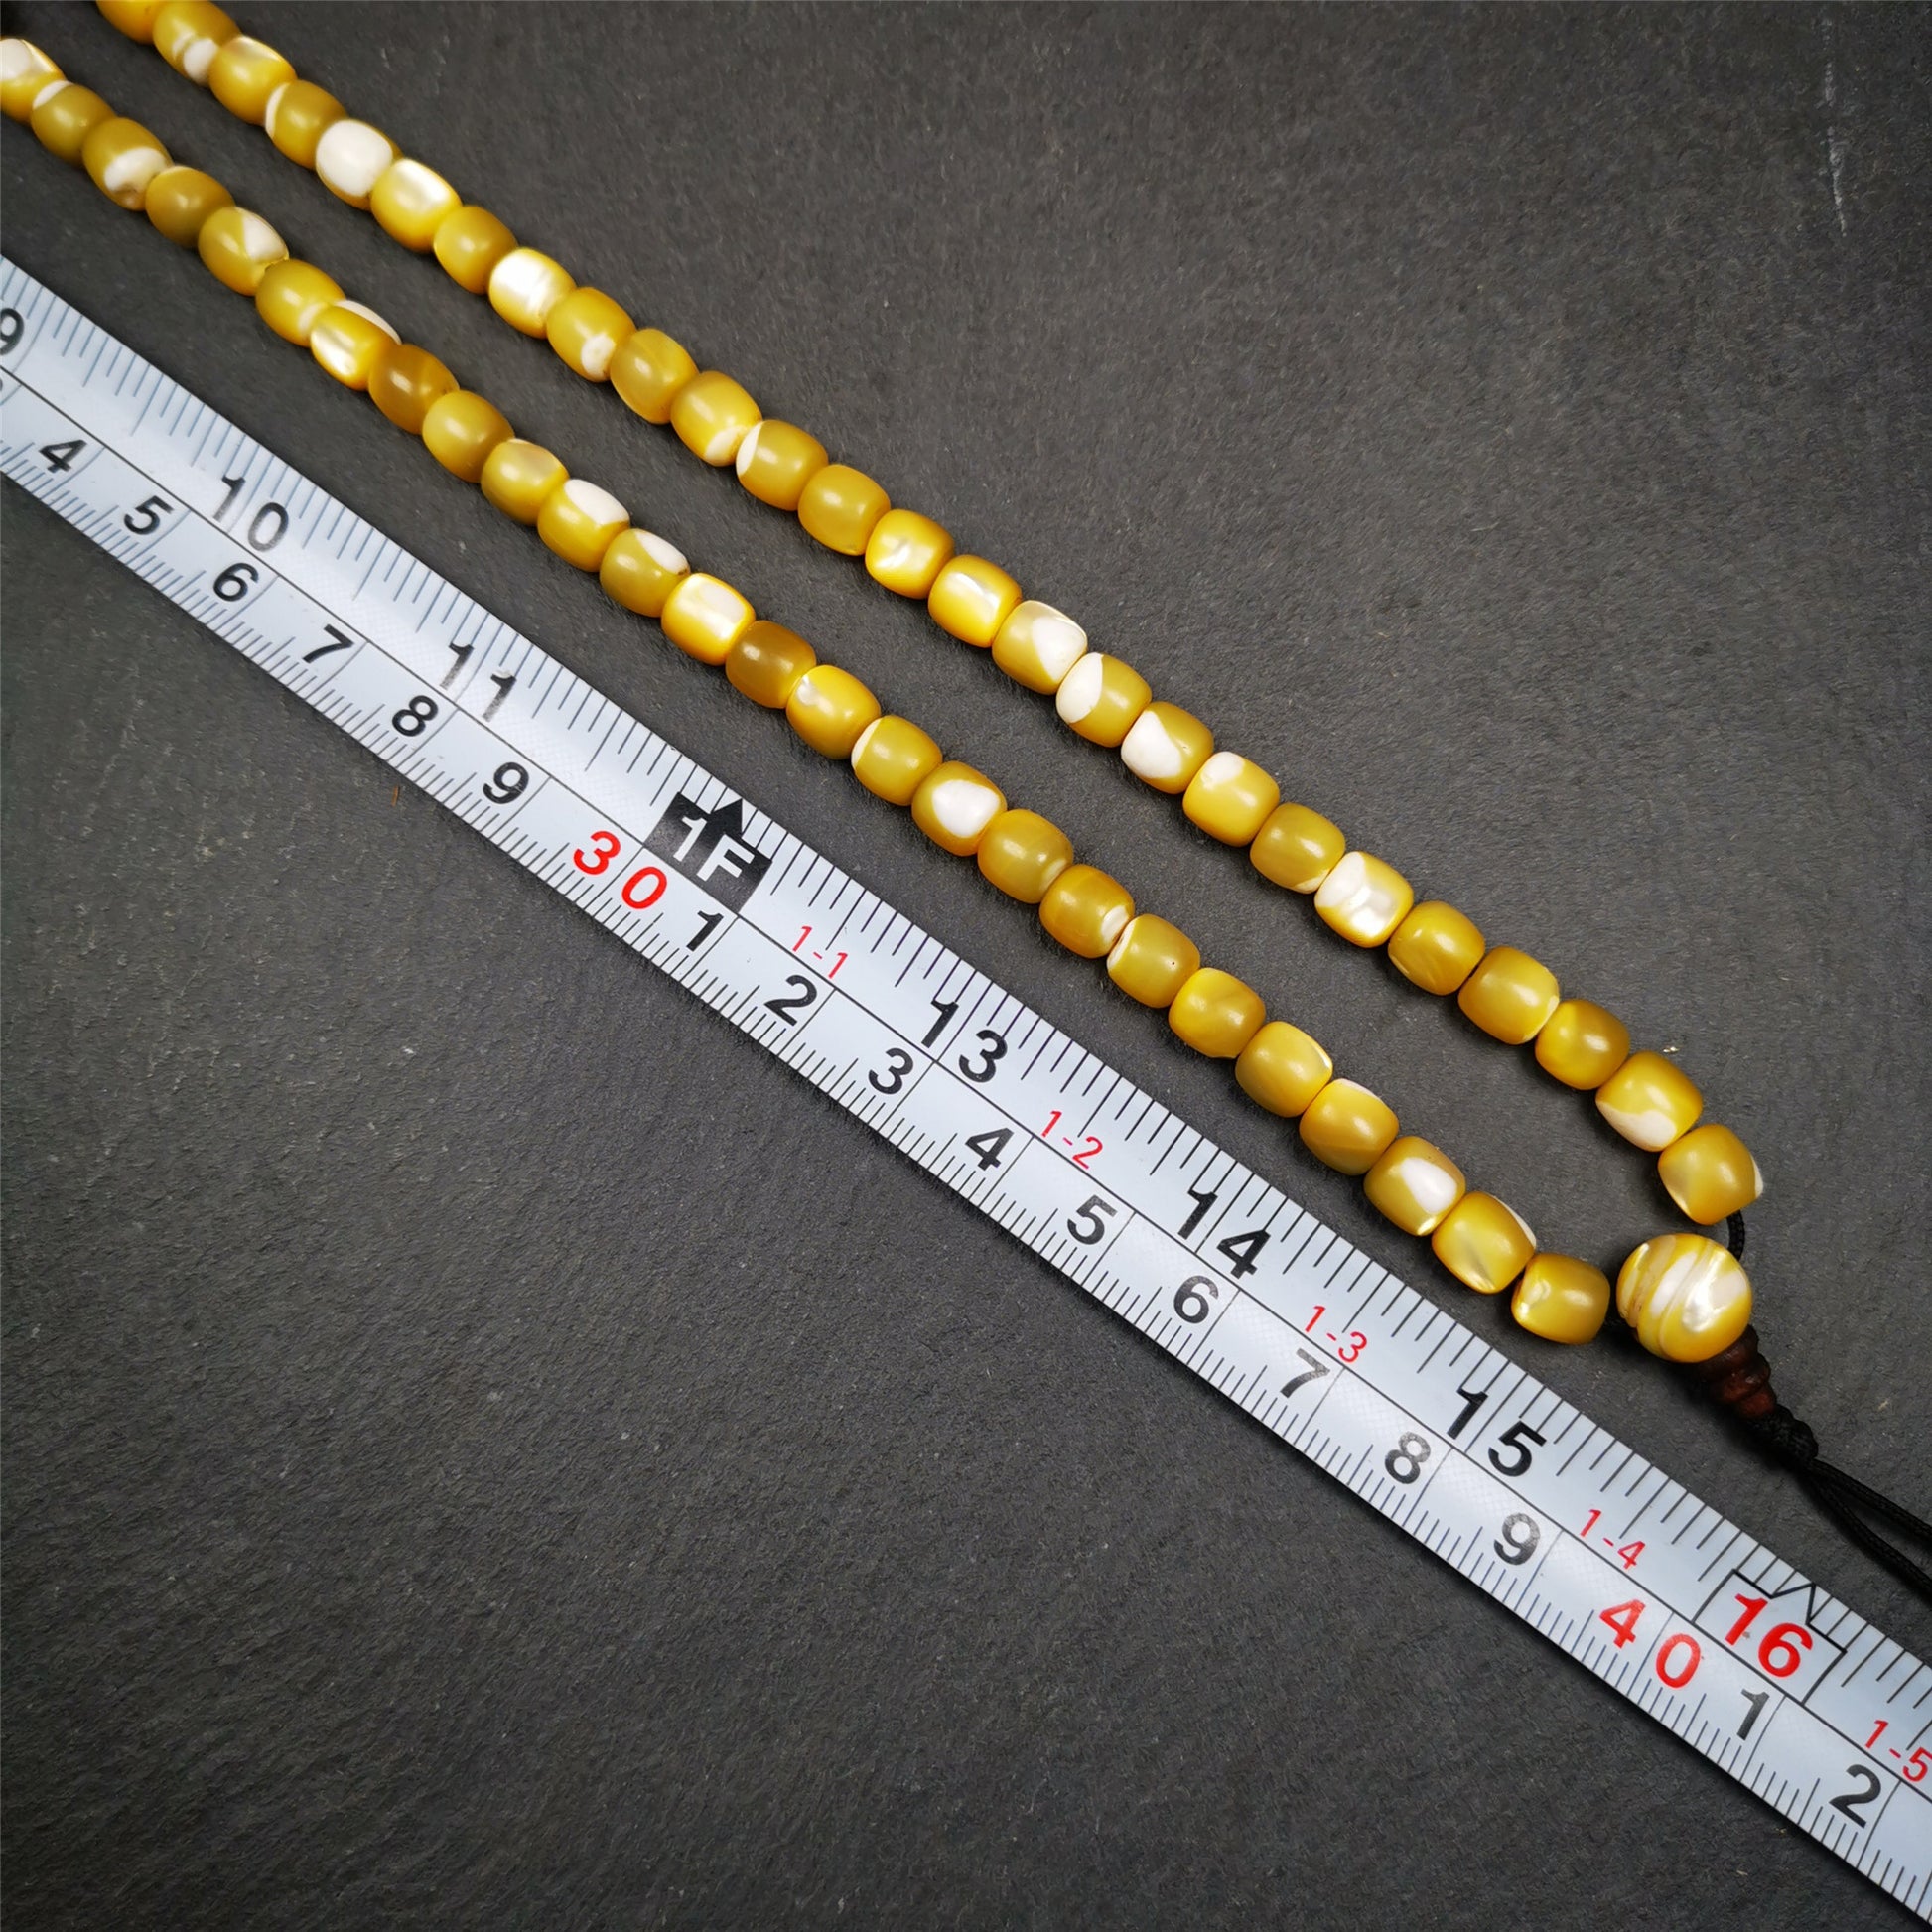 This old fish bone beads mala was handmade from tibetan crafts man in Baiyu County,about 20 years old. It's composed of 108 pcs 6.5mm fish bone beads,then add some agate beads,and a fish bone guru bead on it.